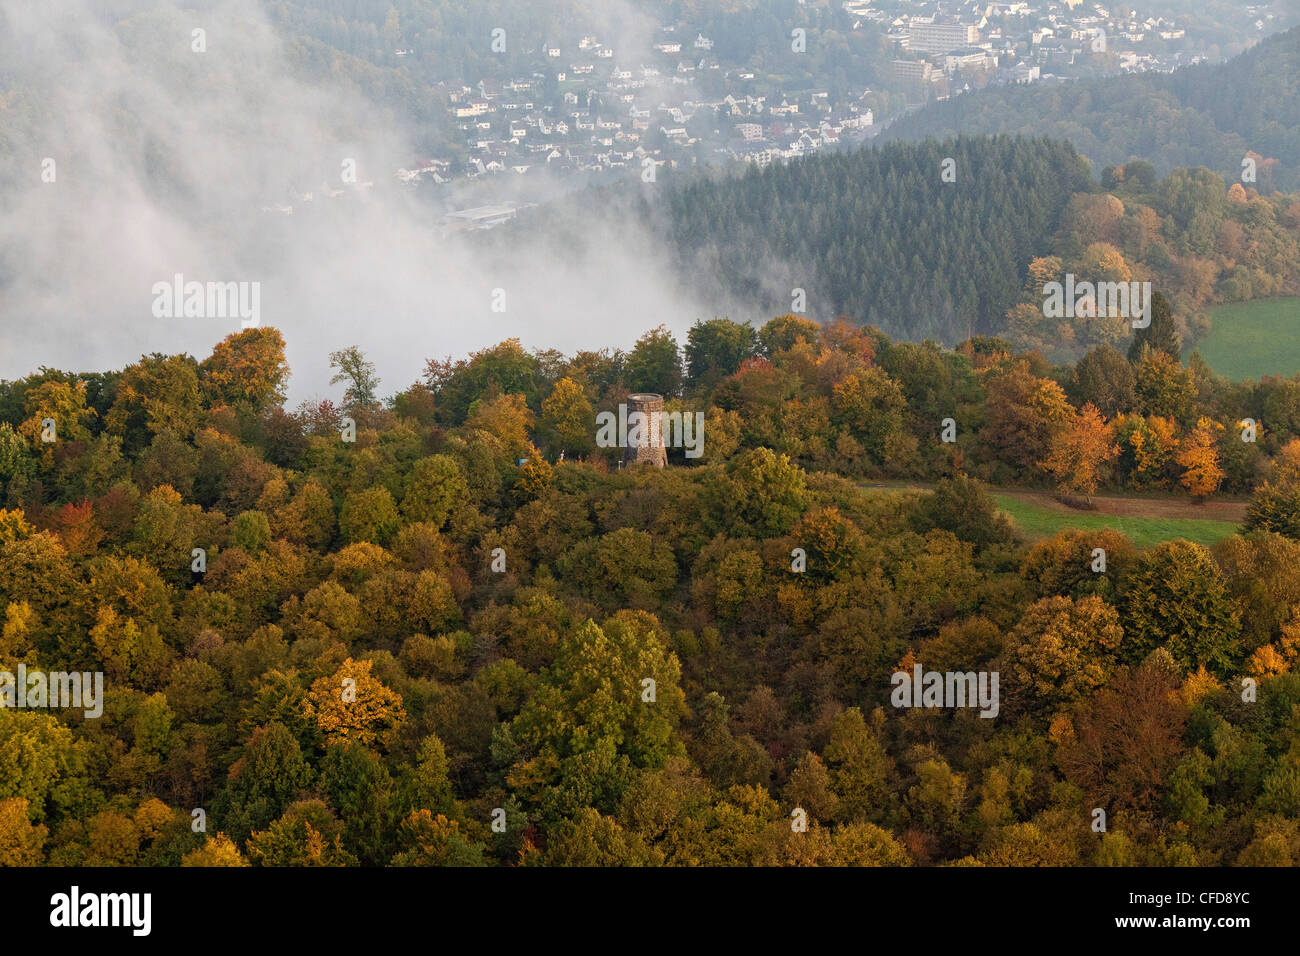 Aerial view of Dronke tower amidst autumnal trees and rising fog, rural district of Rhineland Palatinate, Germany, Europe Stock Photo